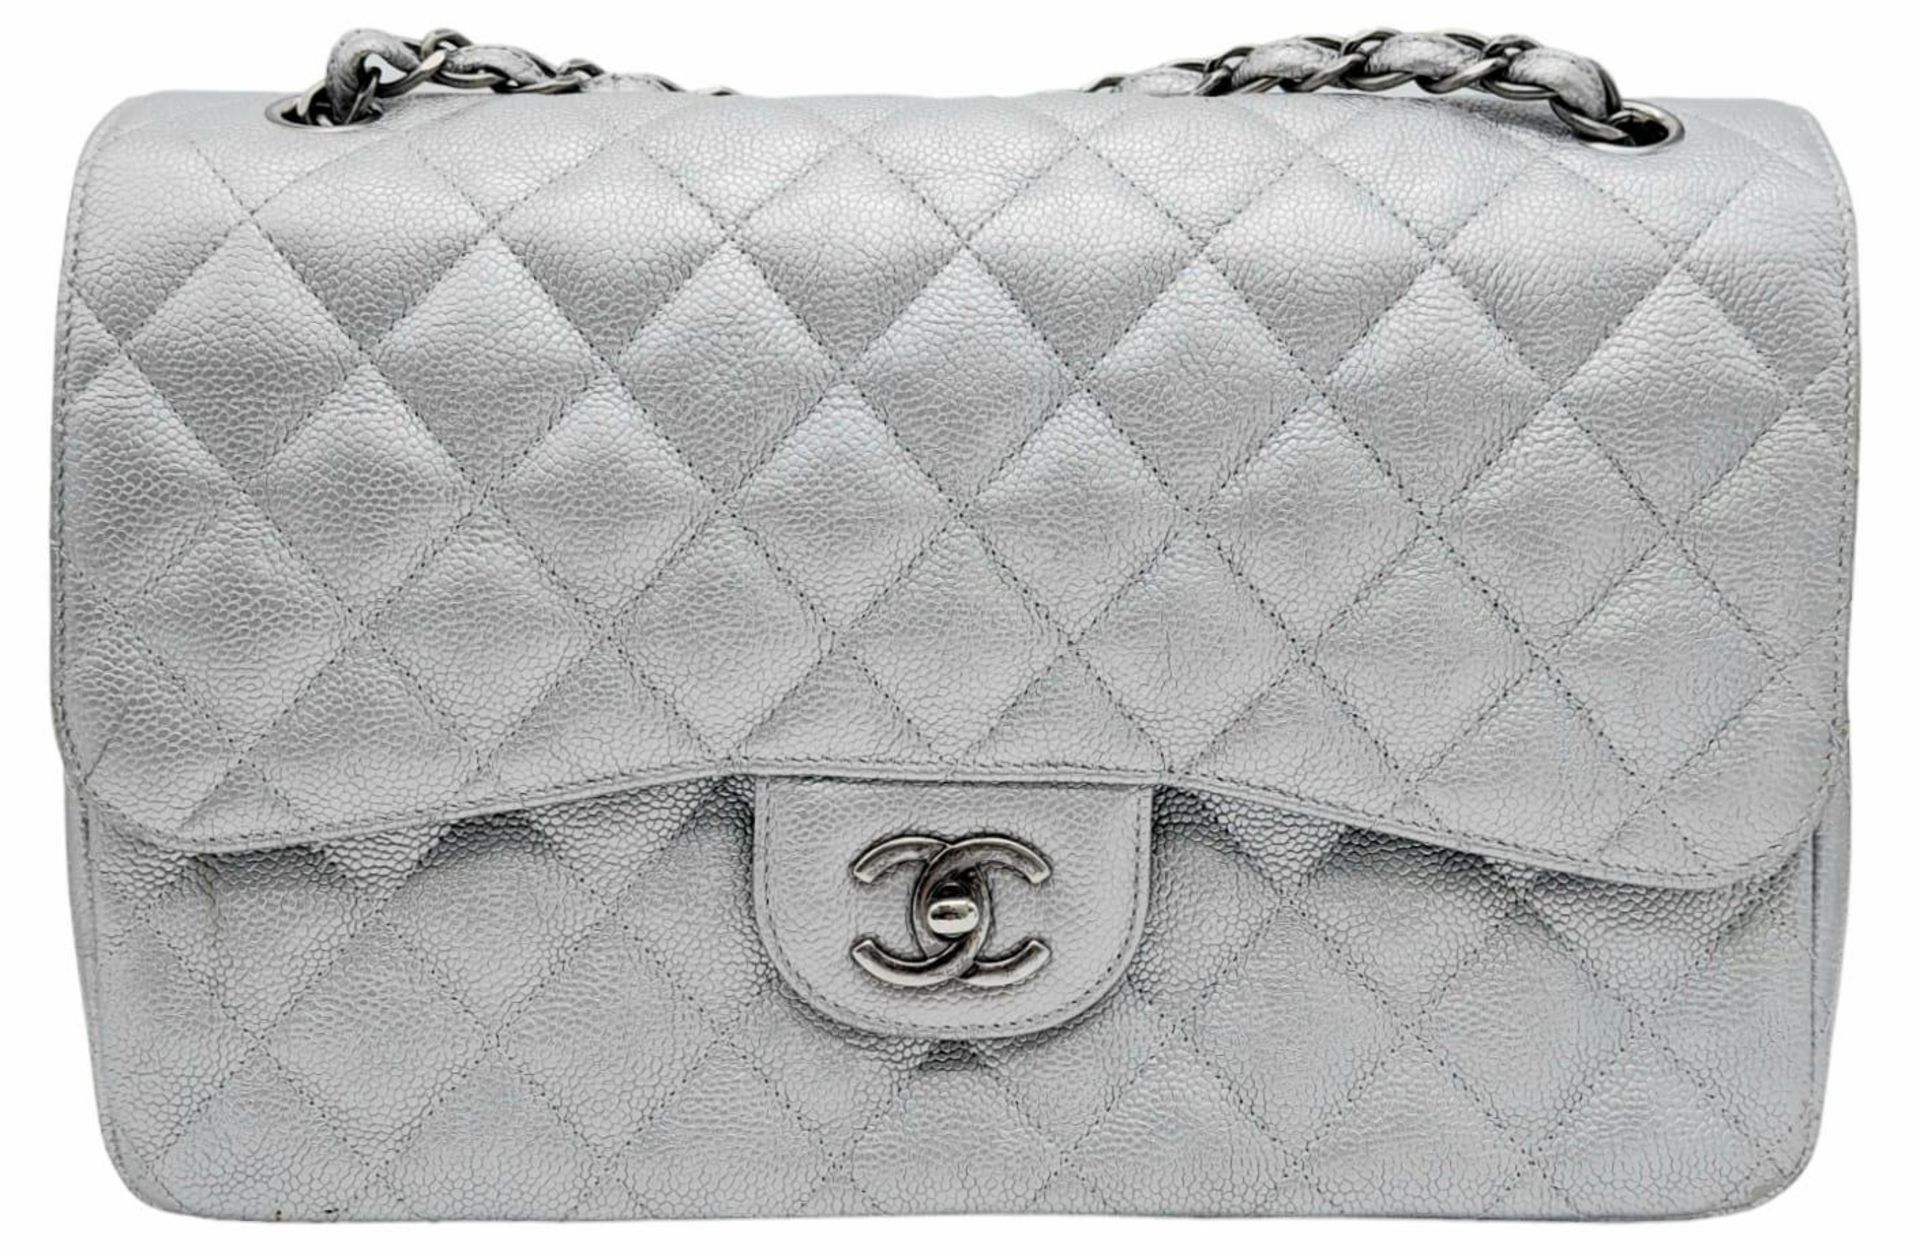 A Chanel Metallic Silver Double Flap Jumbo Bag. Quilted caviar leather. Silver tone hardware. Double